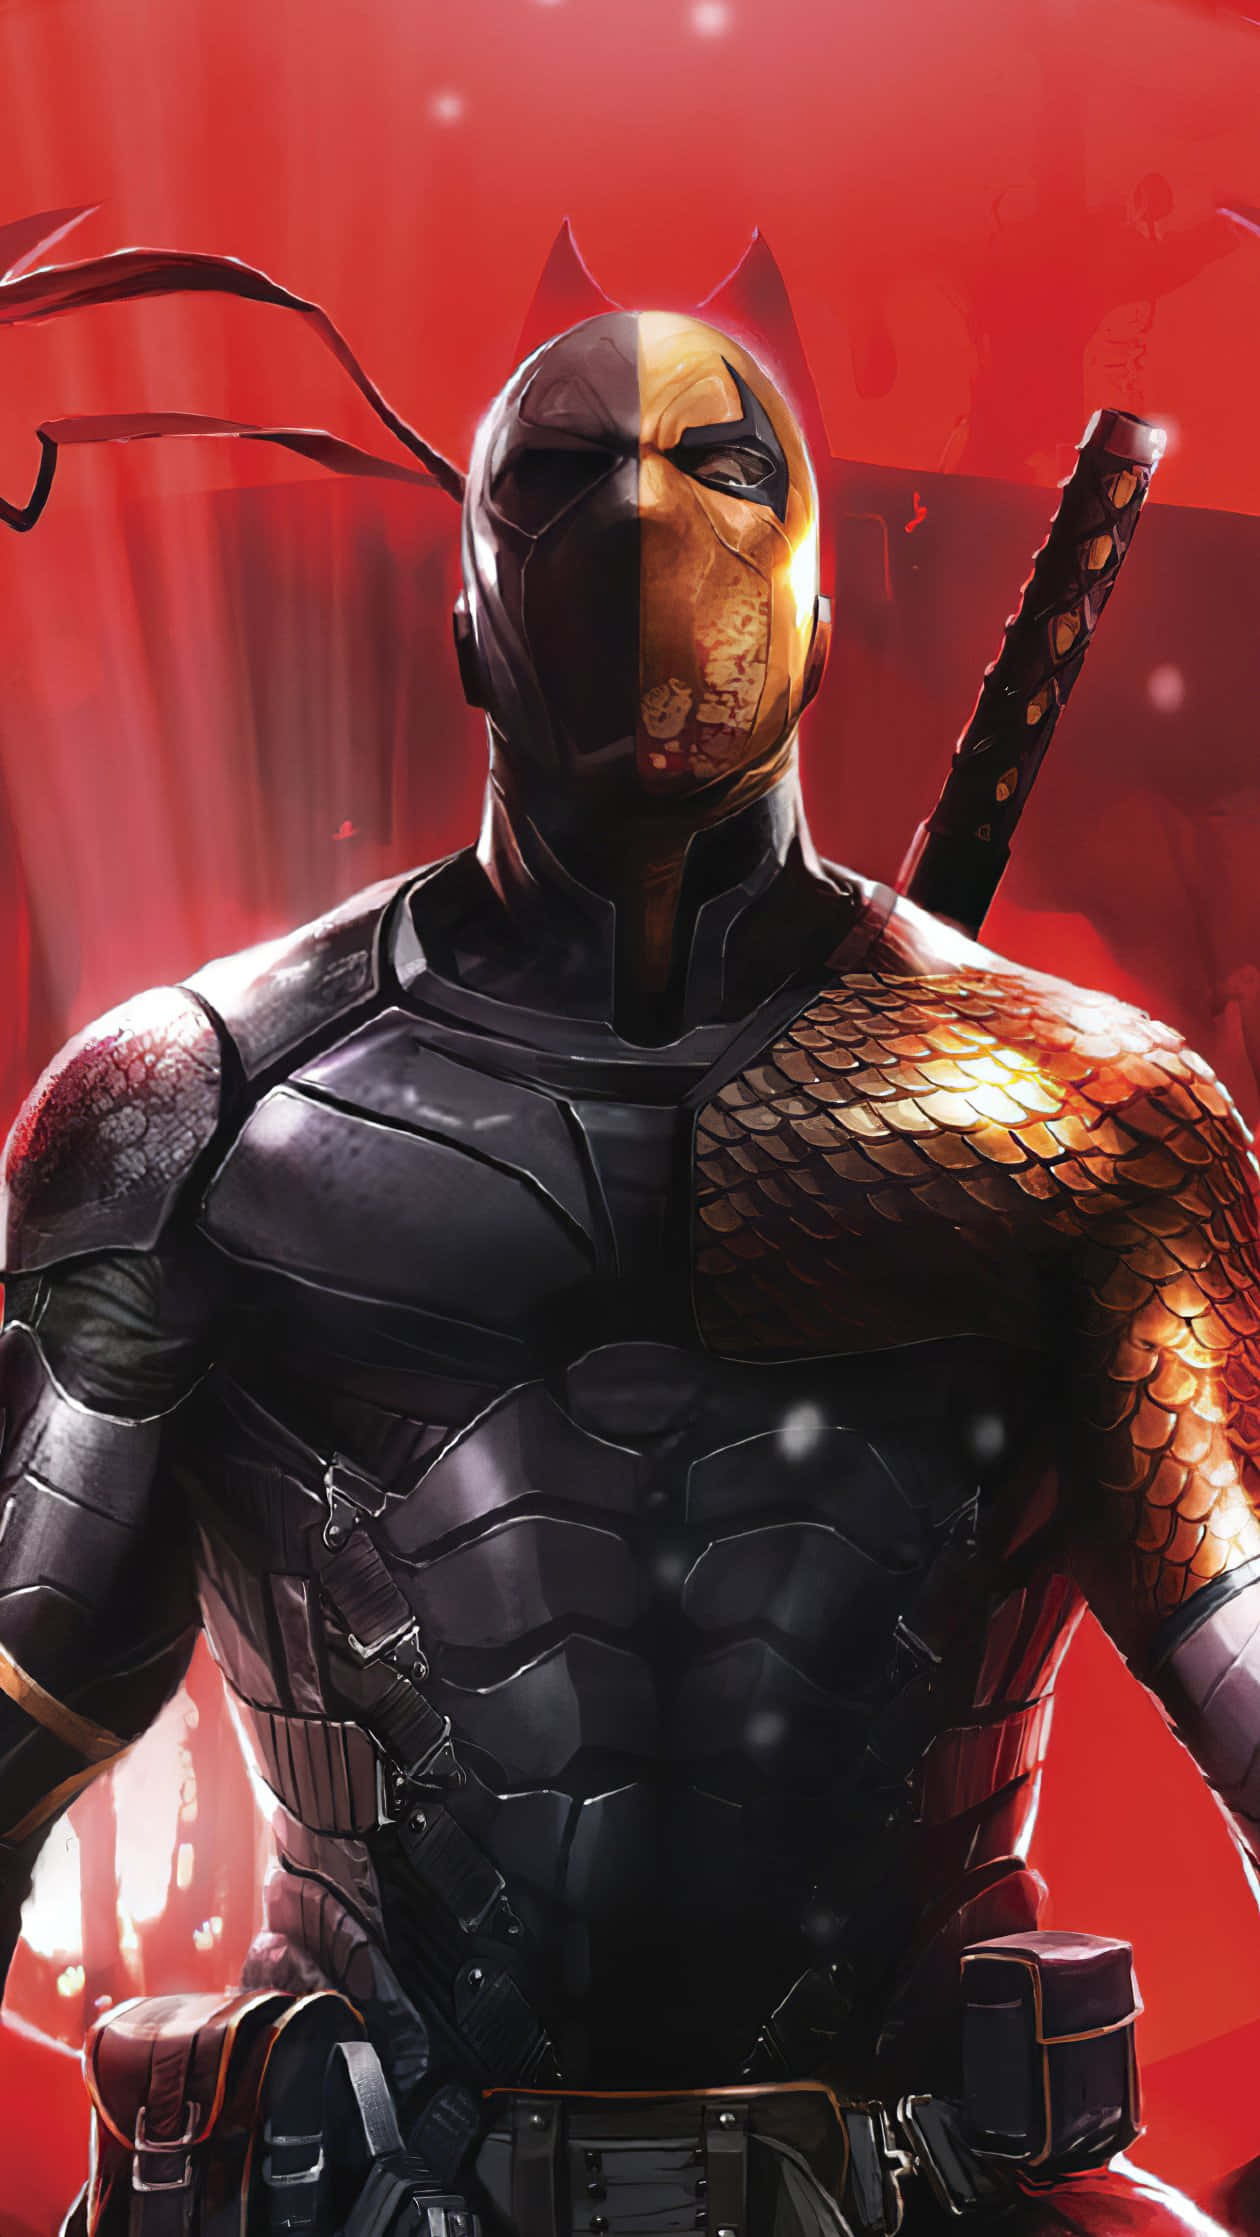 Stay Elite with Deathstroke